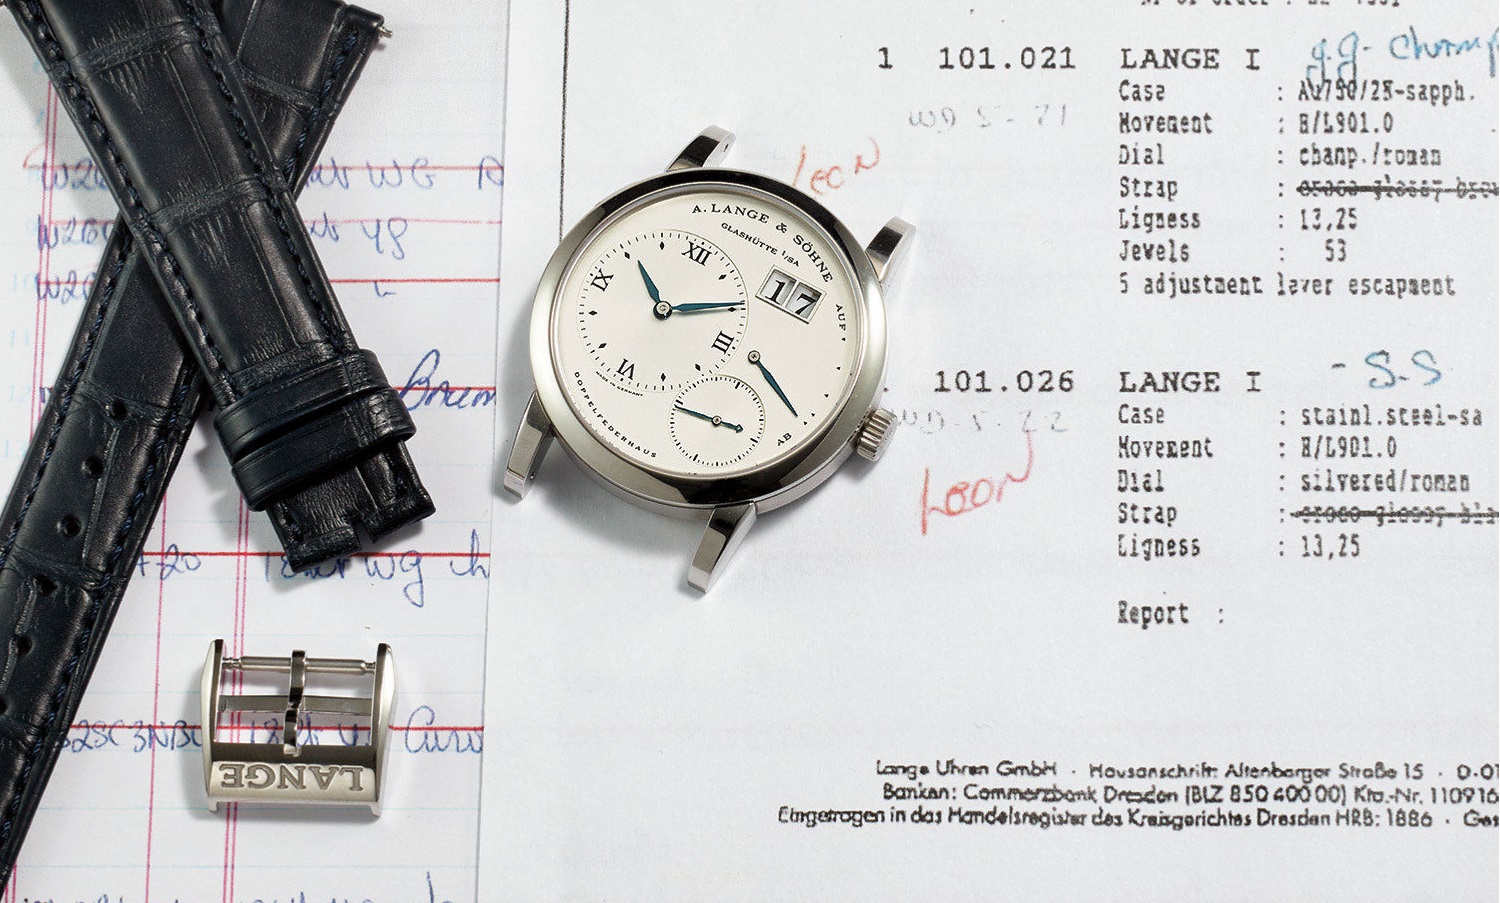 most expensive lange söhne stainless steel lange 1 reference 101.026